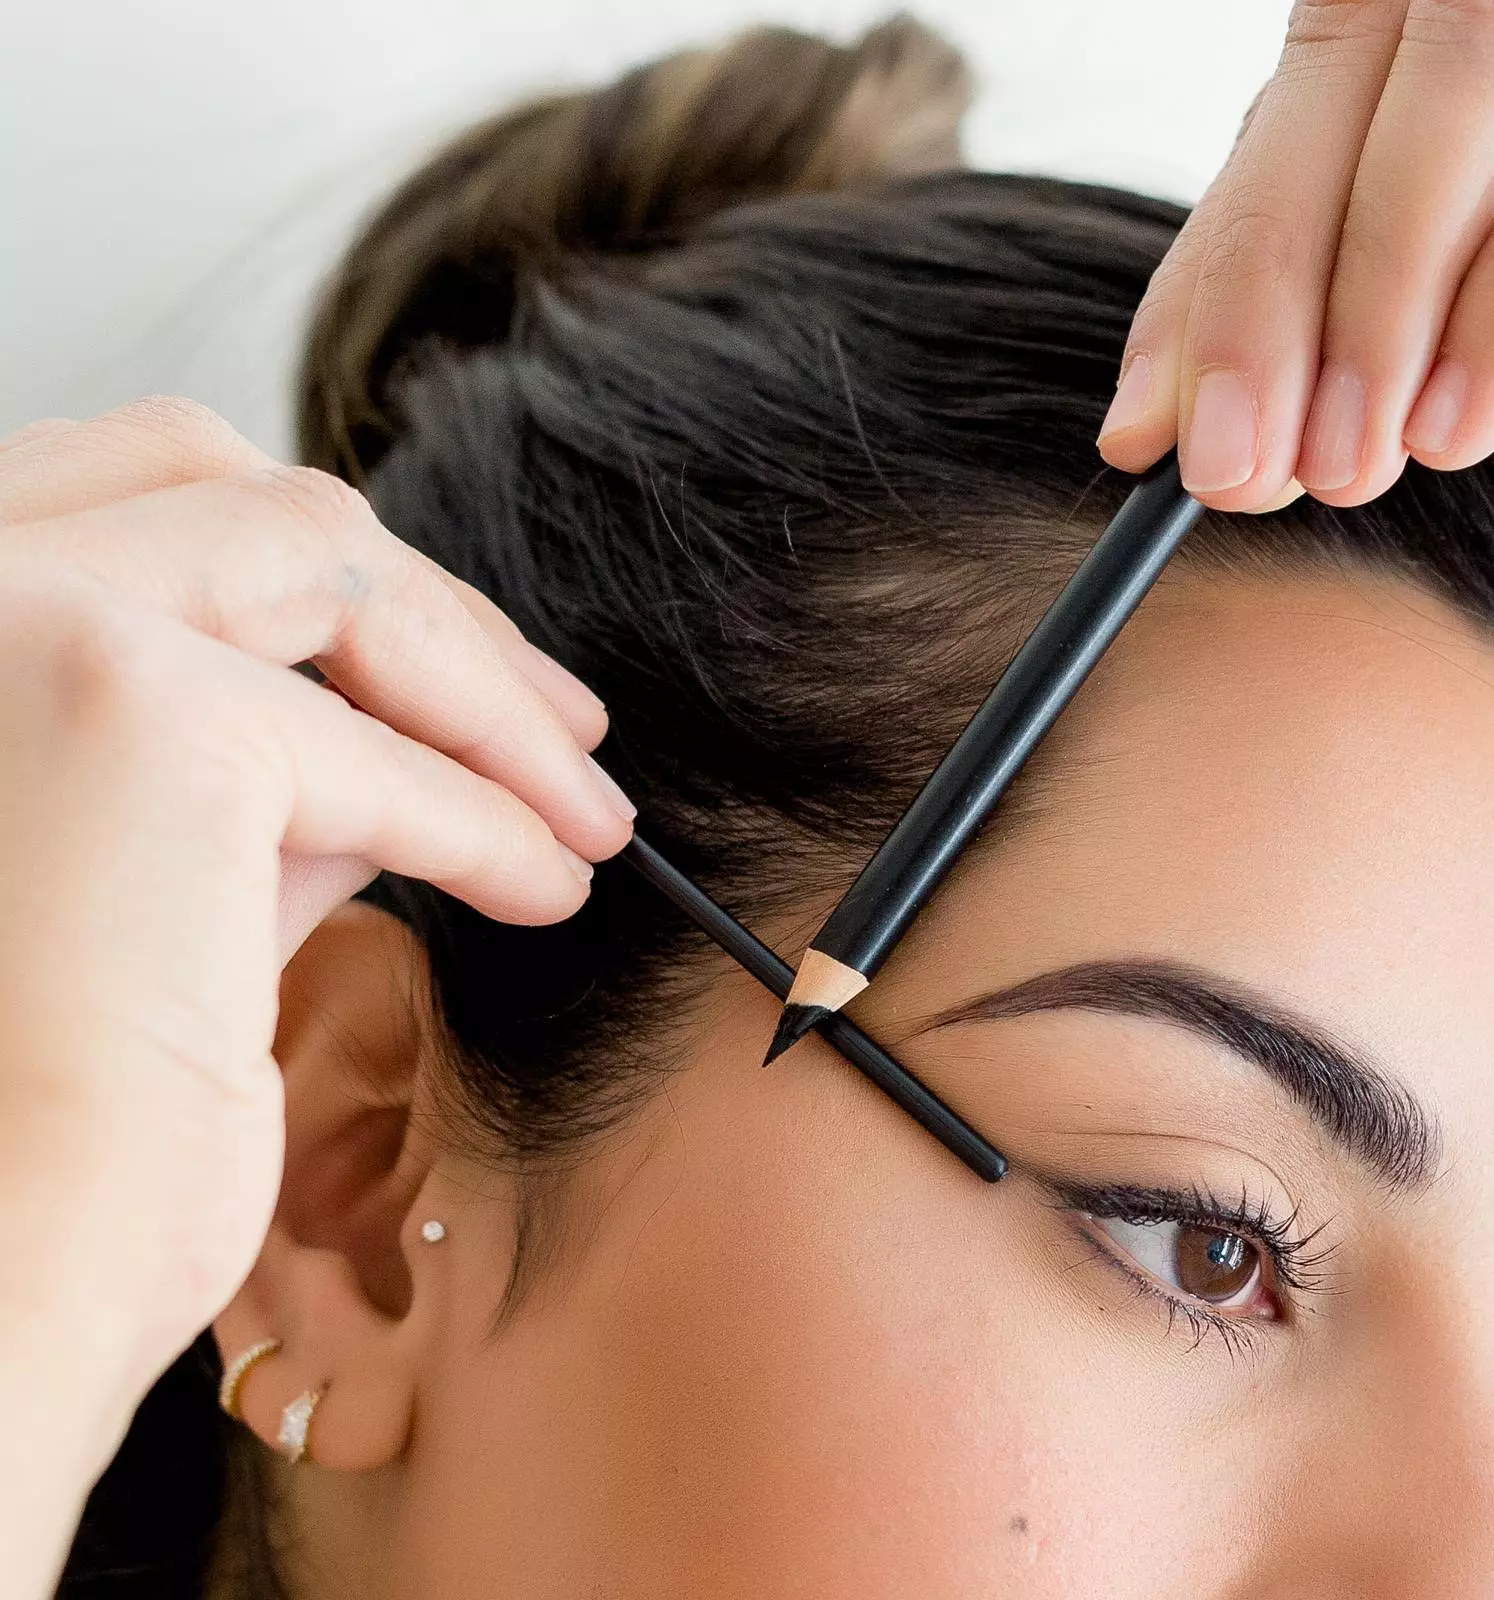 Use a ruler or brow pencil to draw your guide lines, aligning your brow tail with the outer corner of your eye (